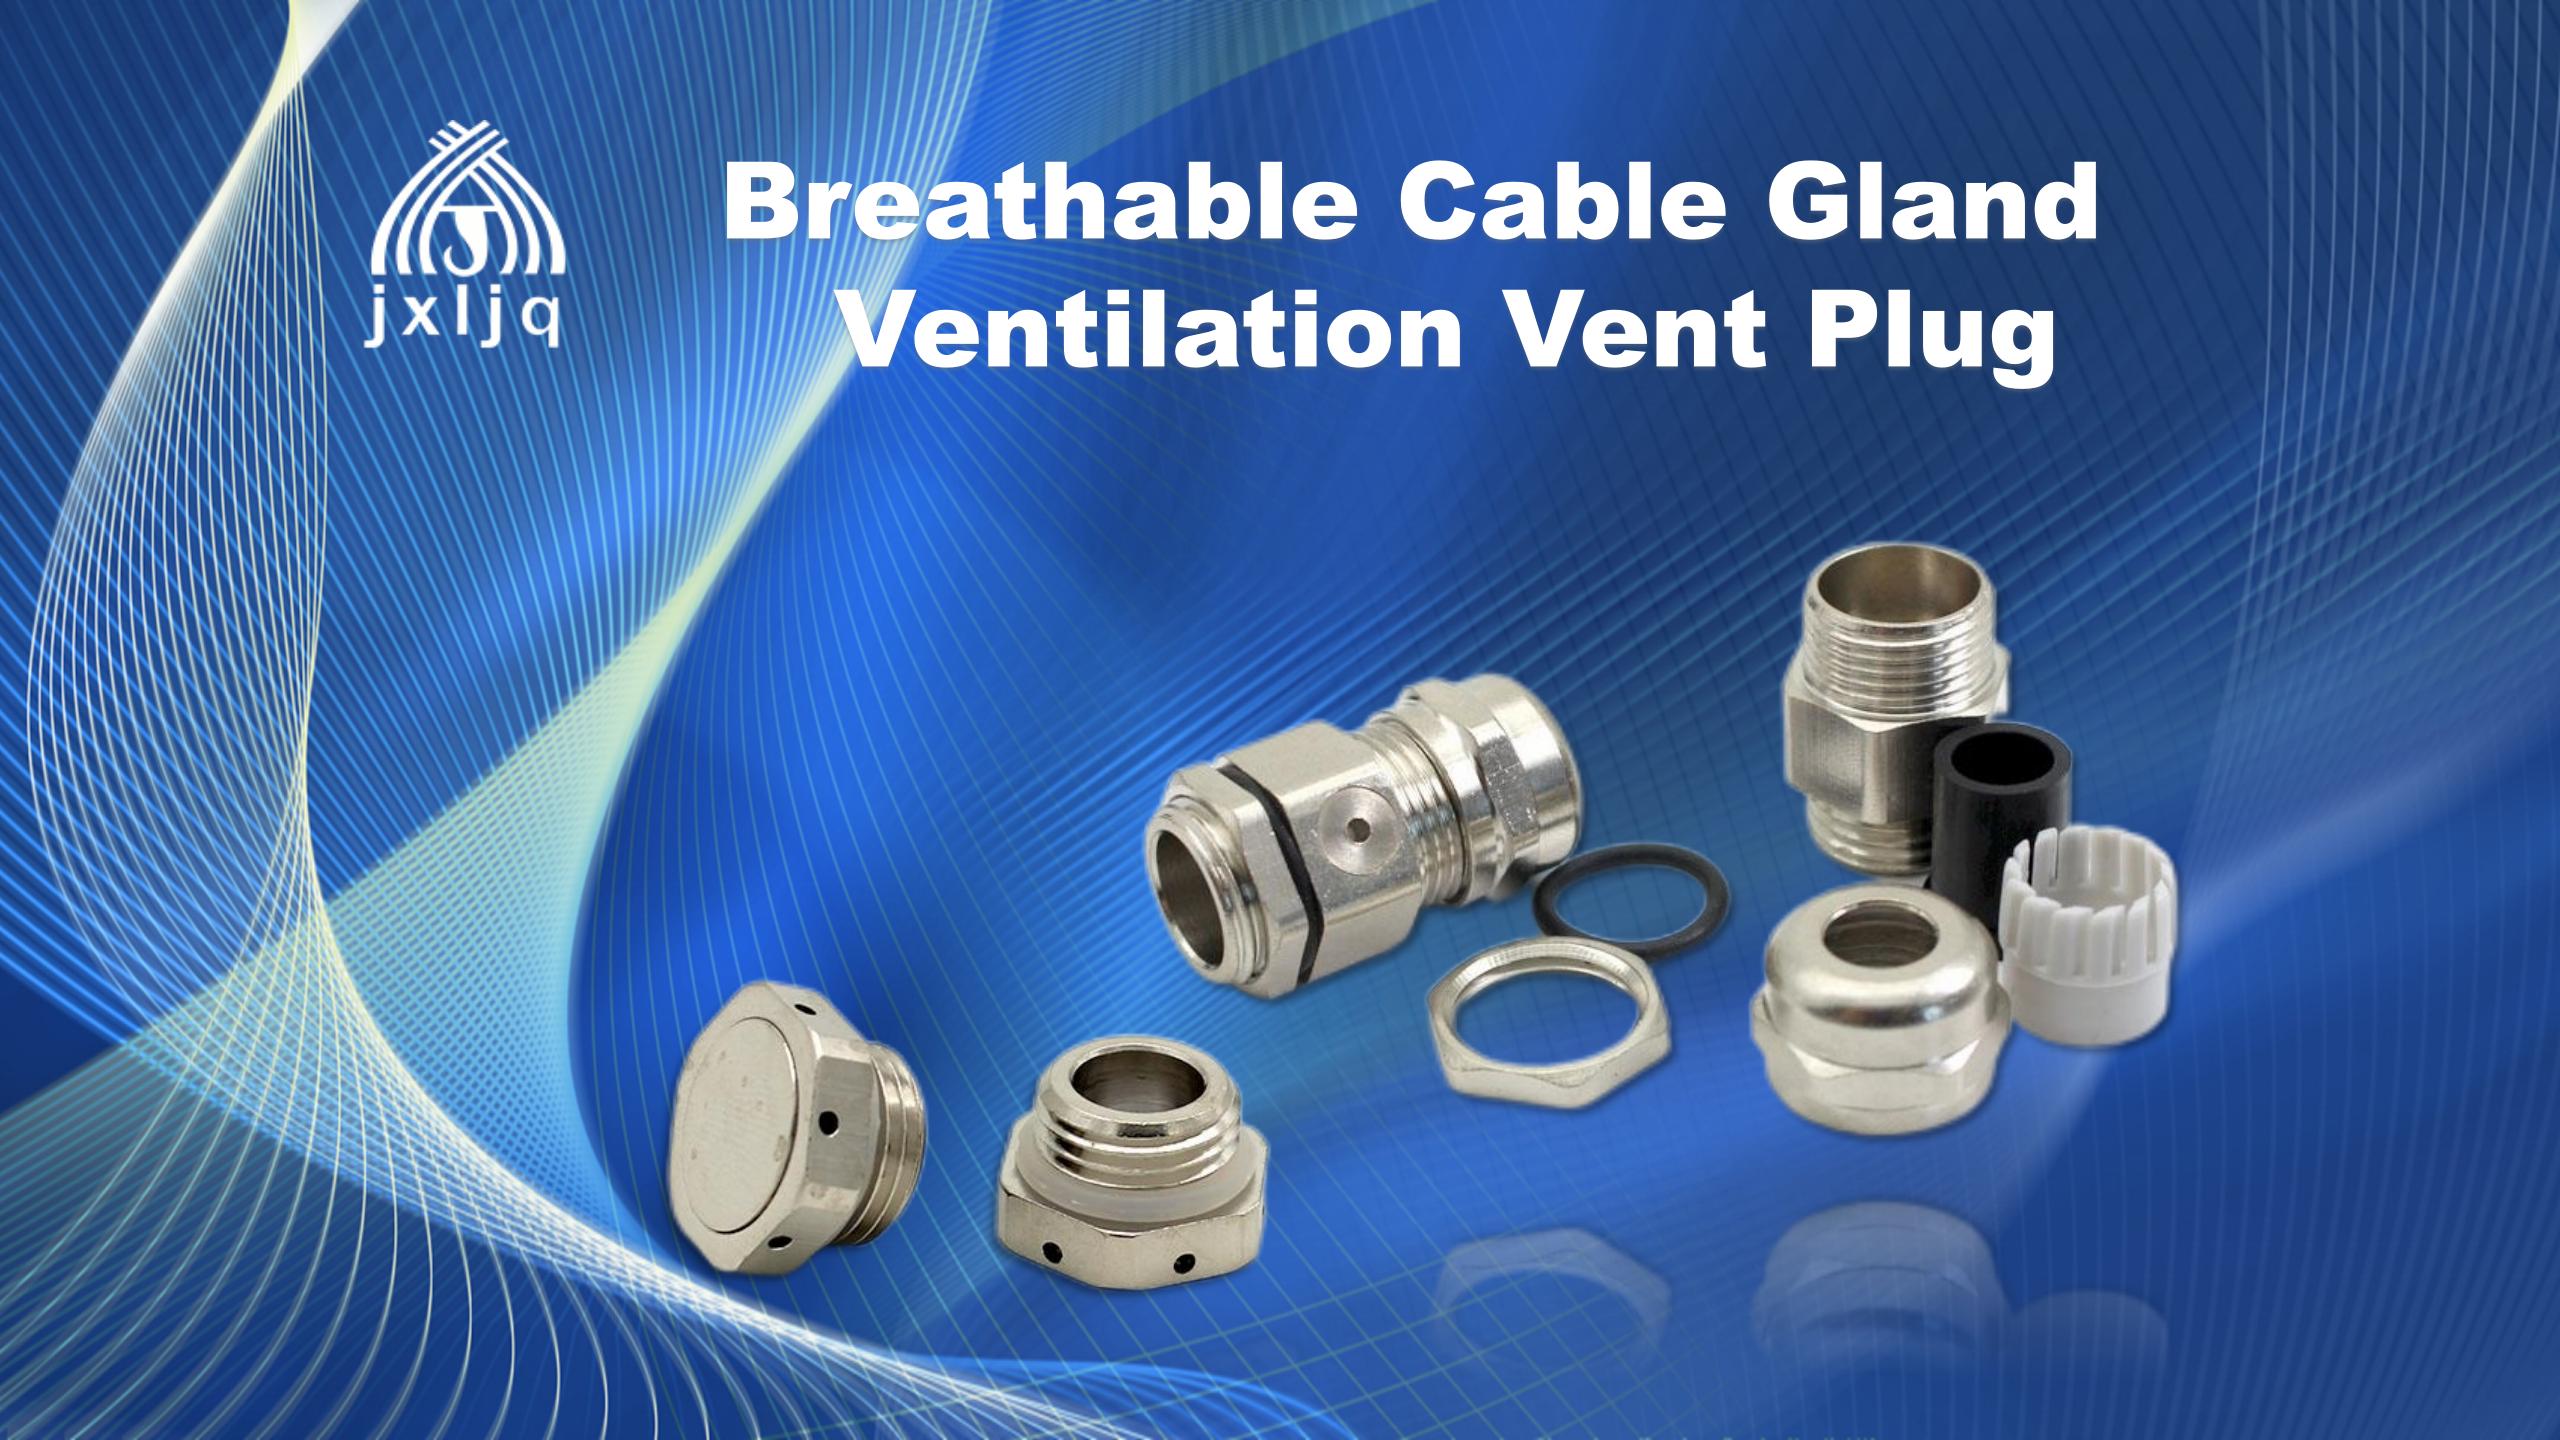 Using Breathable Cable Gland or Ventilation Vent Plug against condensation water